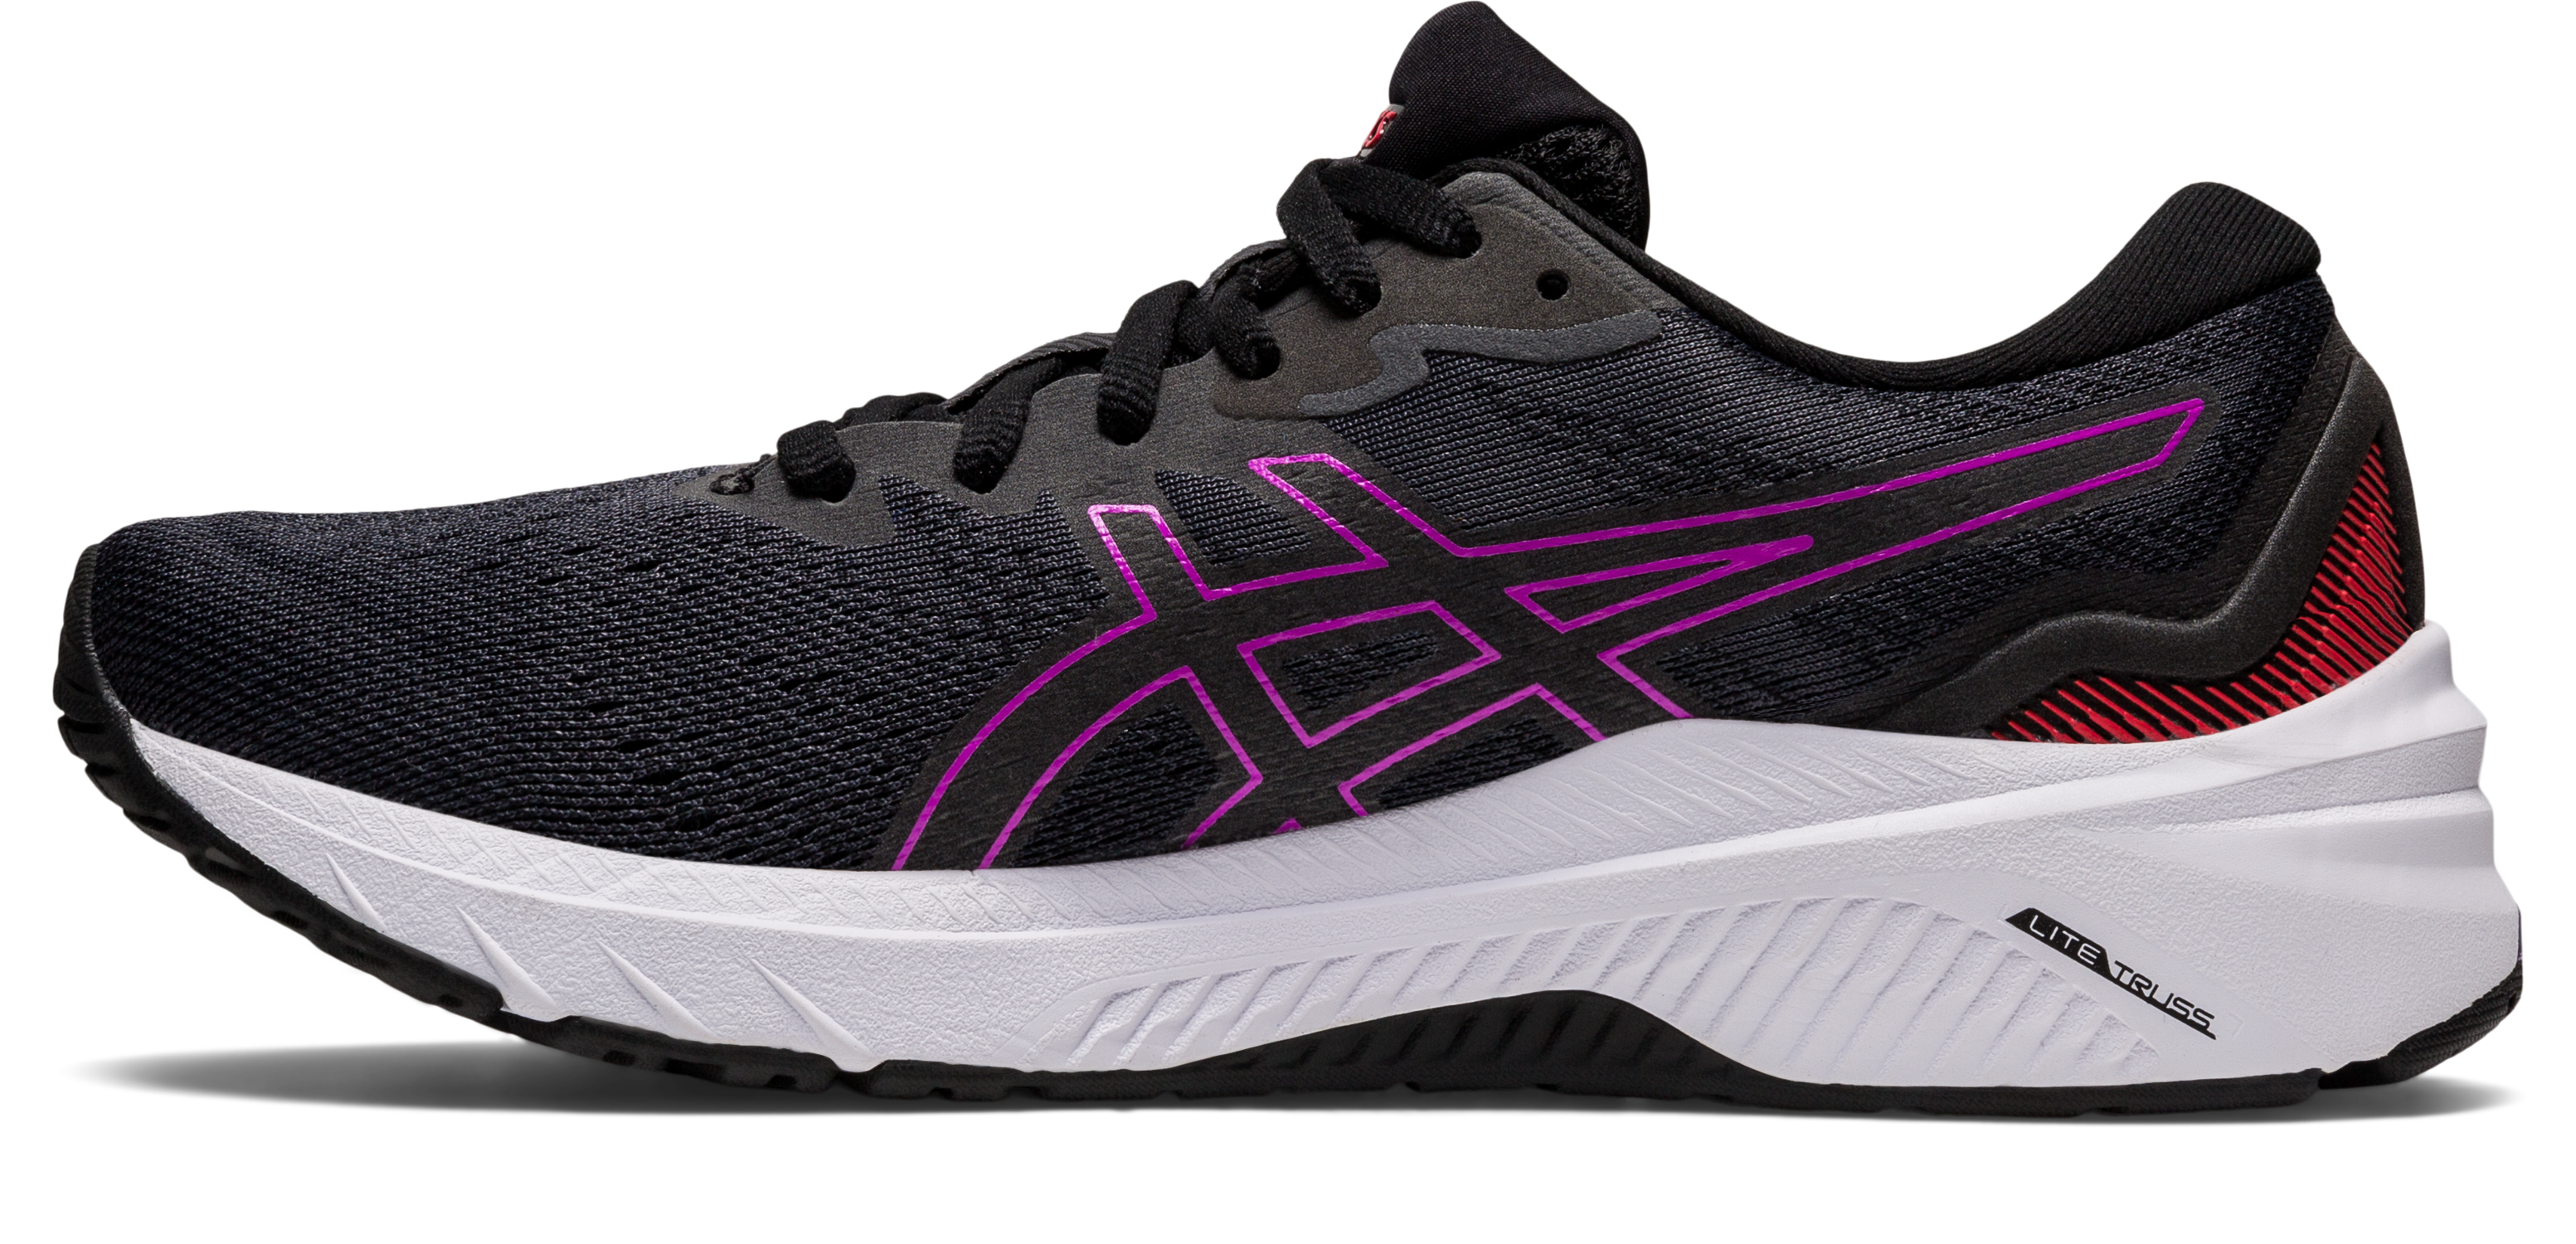 Asics Women's GT-1000 11 Running Shoes in Black/Orchid